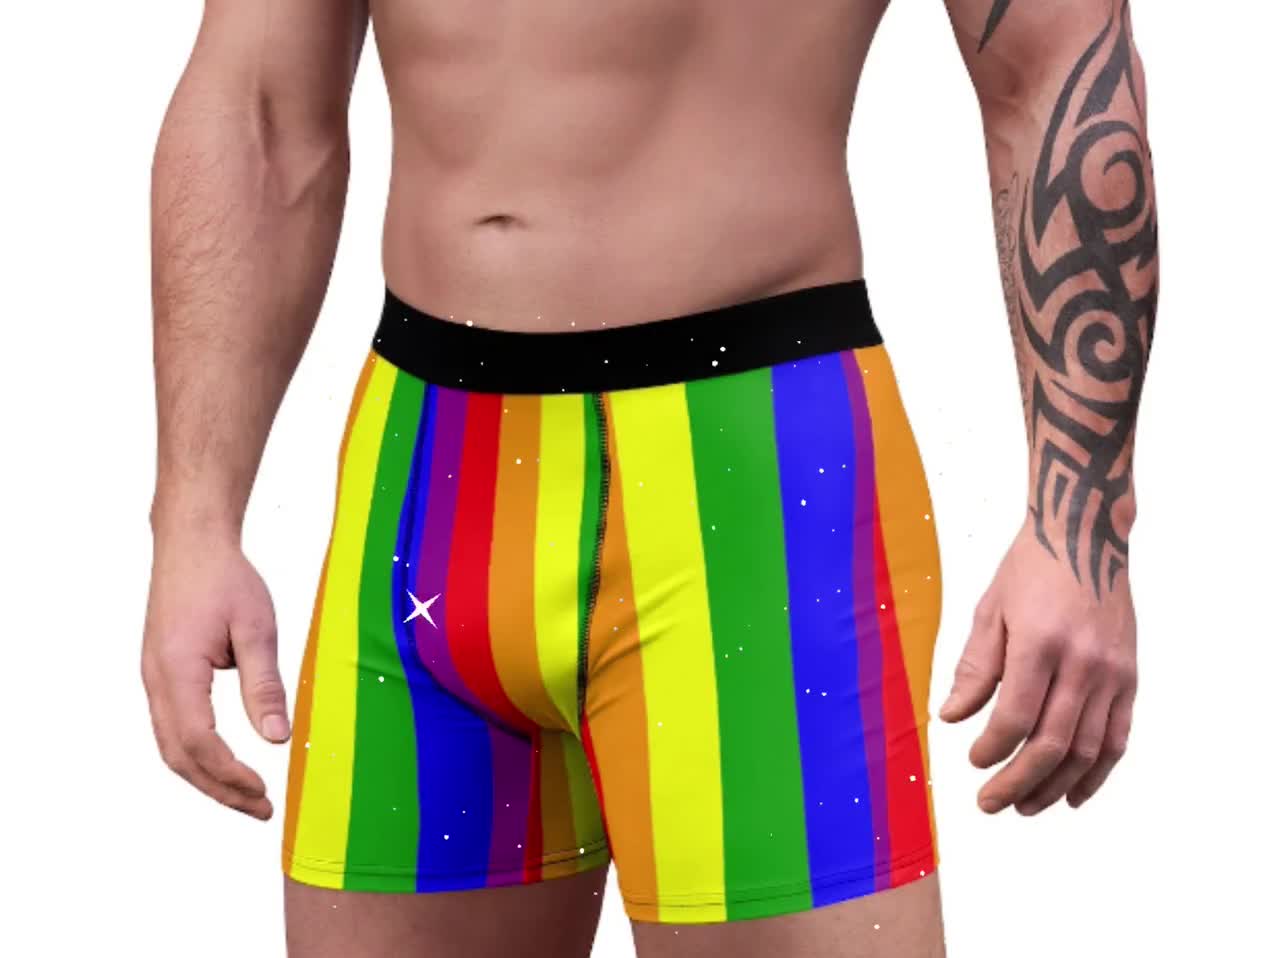 This underwear brand has released a Pride collection with rainbow